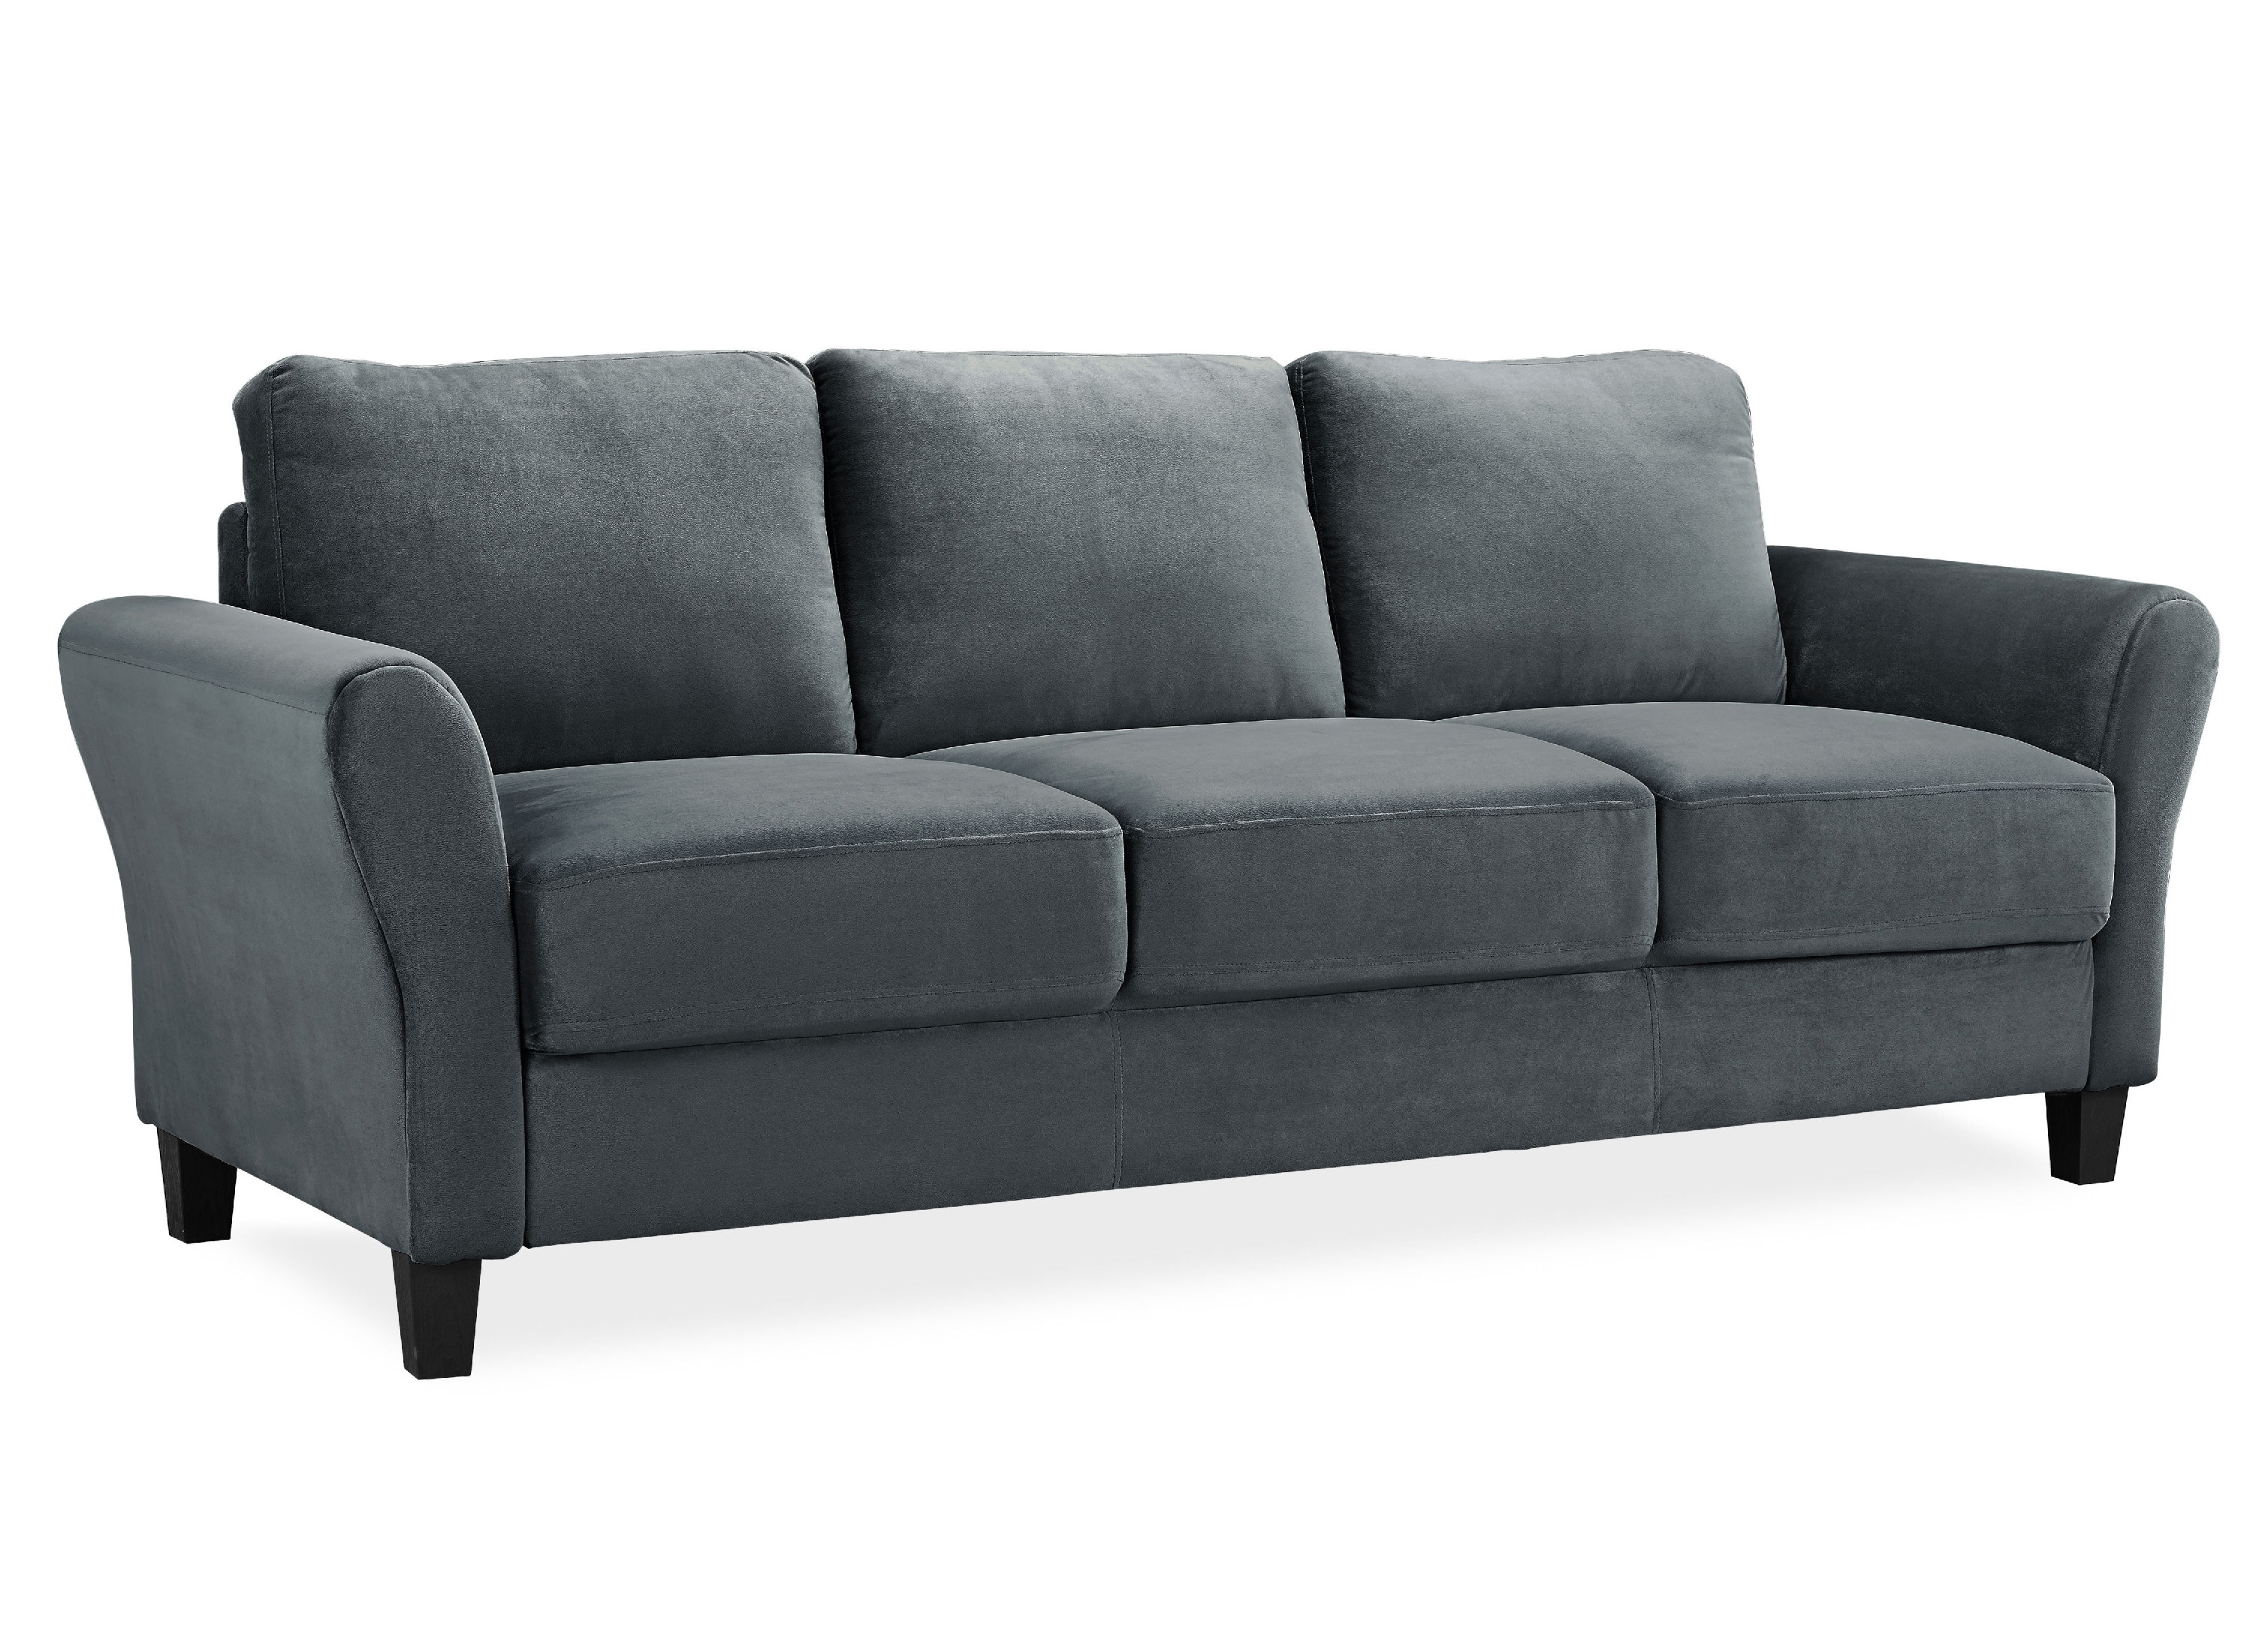 Lifestyle Solutions Alexa Sofa with Curved Arms, Gray Fabric - image 2 of 6